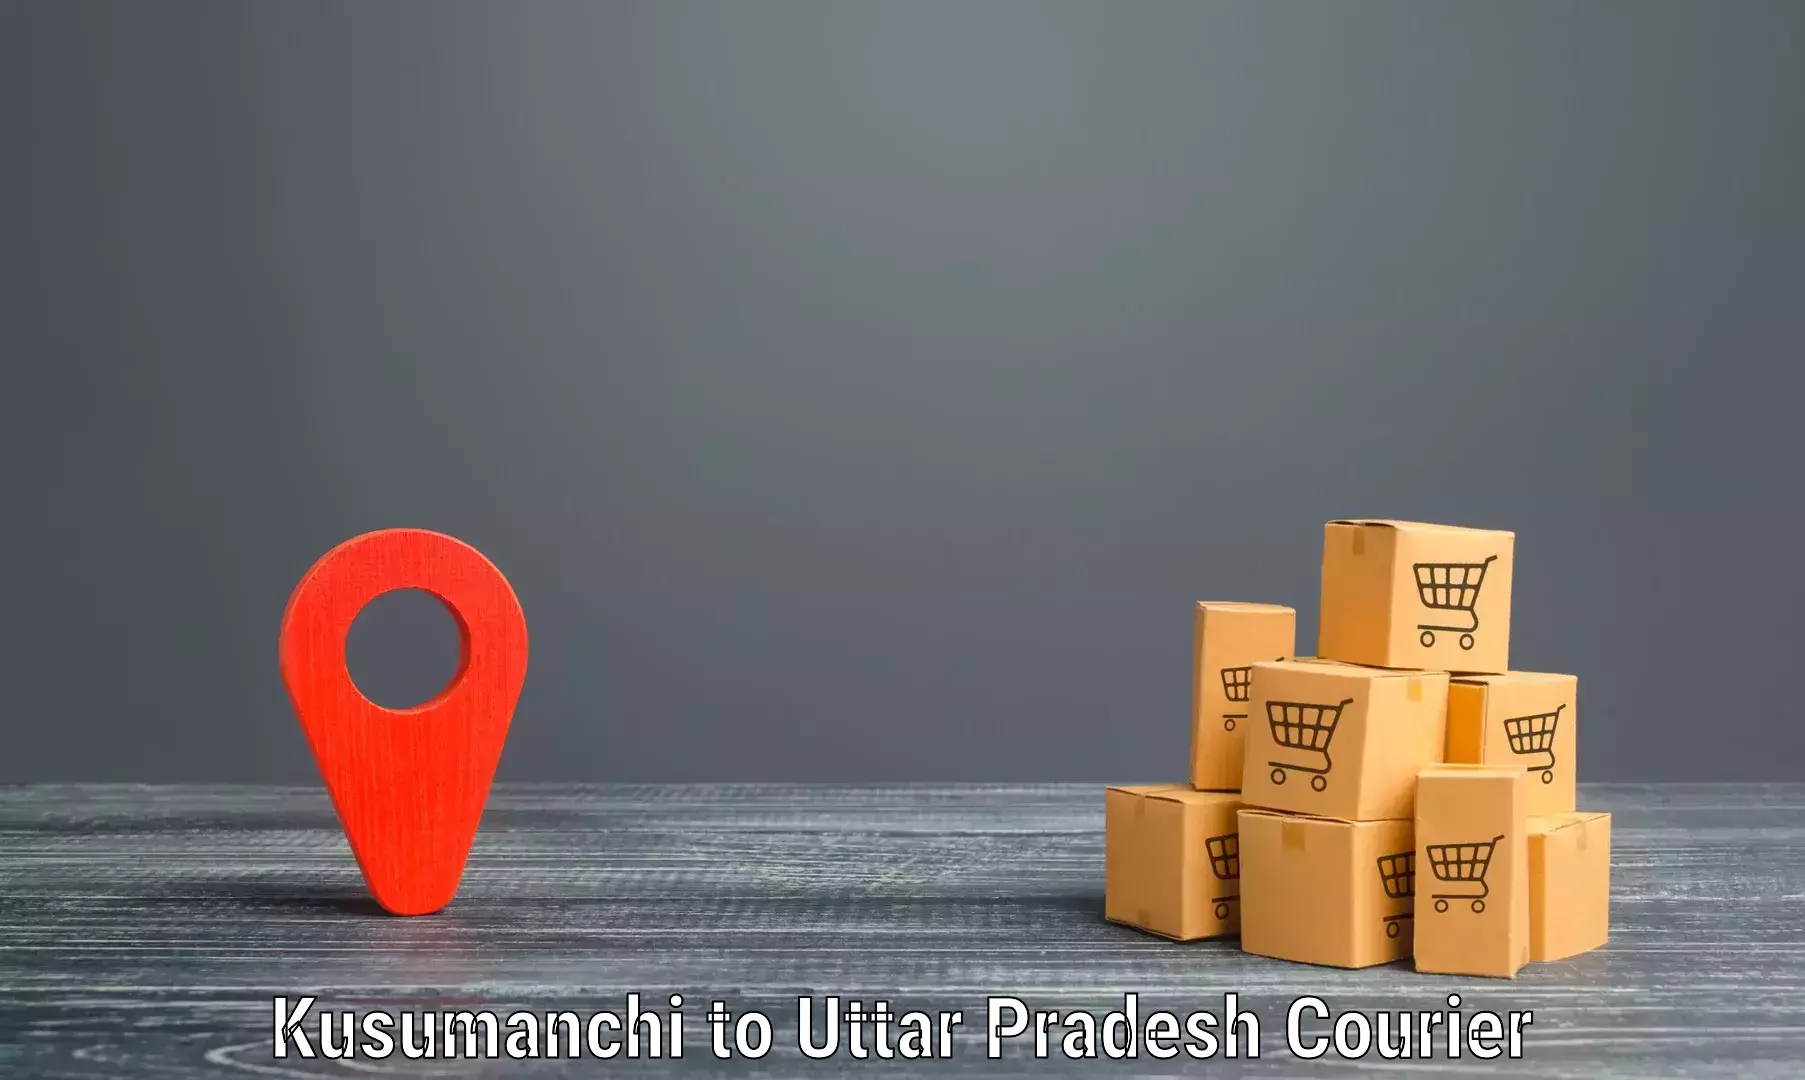 Package delivery network Kusumanchi to NIT Allahabad